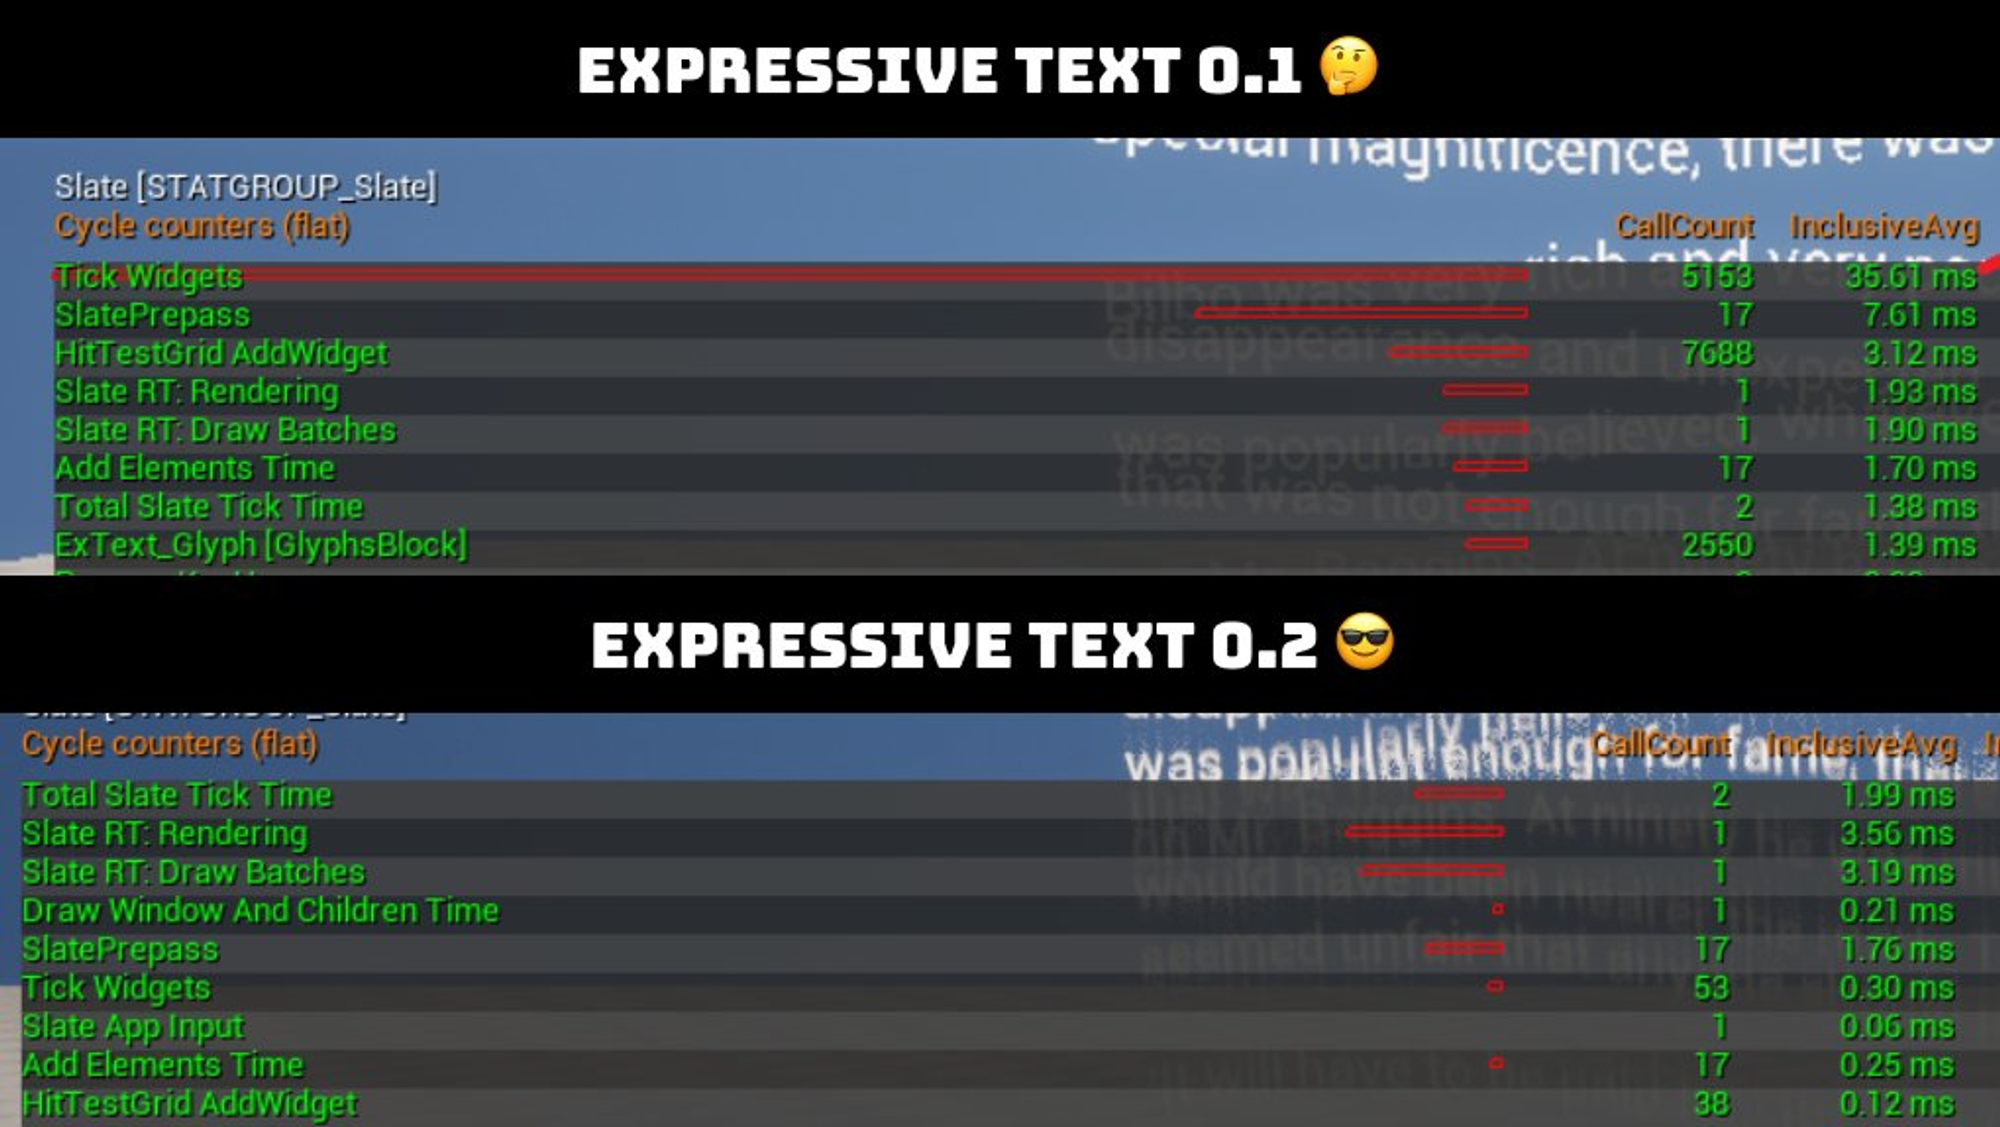 Performance comparison between Expressive Text 0.1.1 and Expressive Text 0.2 rendering around 5000 animated characters at once